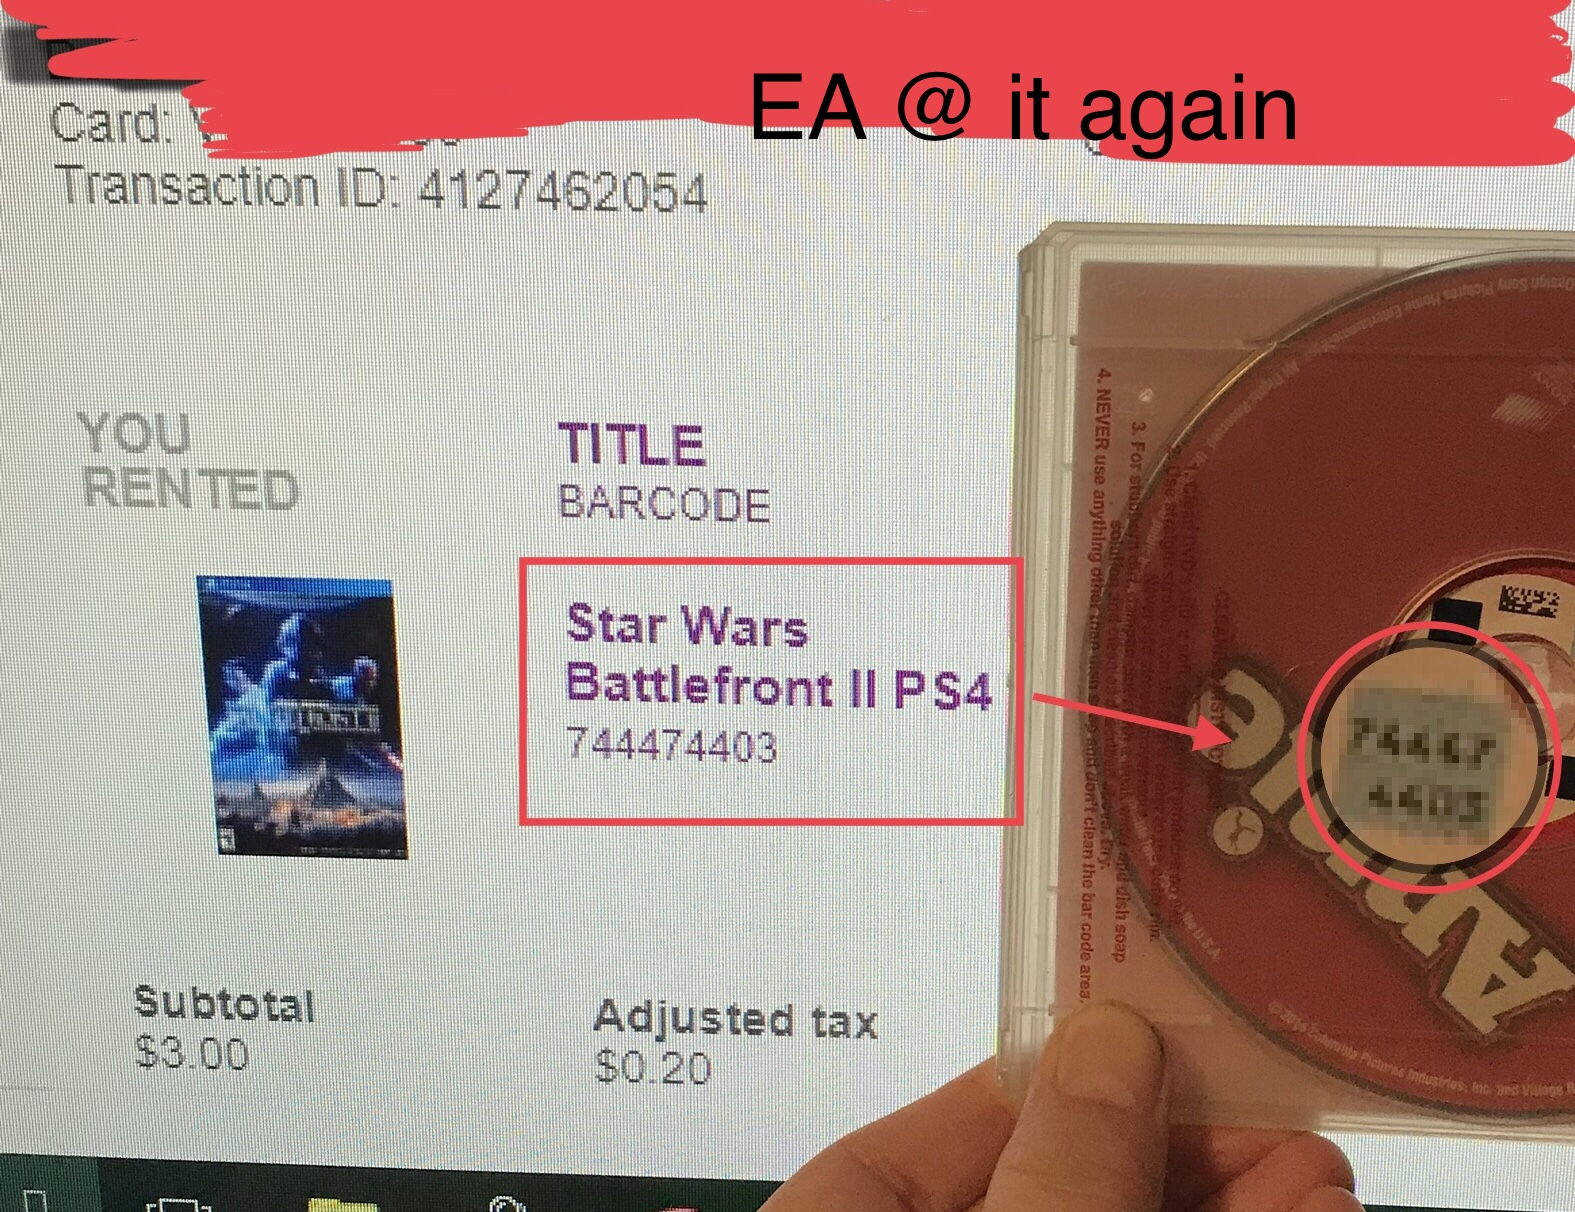 Son wanted to play Battlefront 2, but we did not want to pay 60 dollars, so we tried to Redbox it, this was the result. Annie WTF?